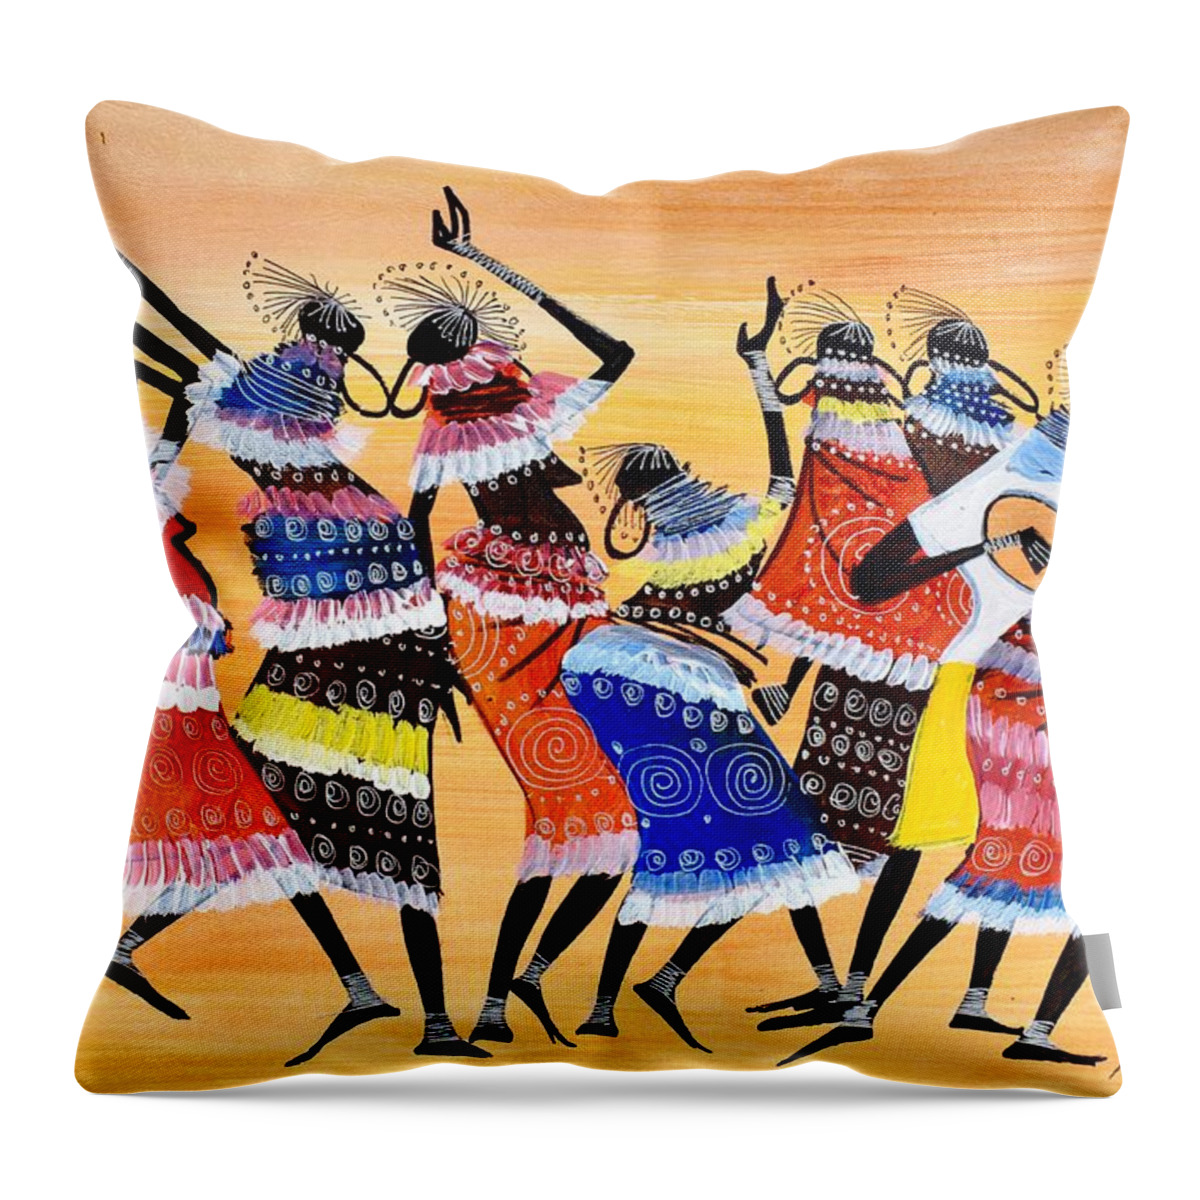 African Art Throw Pillow featuring the painting B-404 by Martin Bulinya